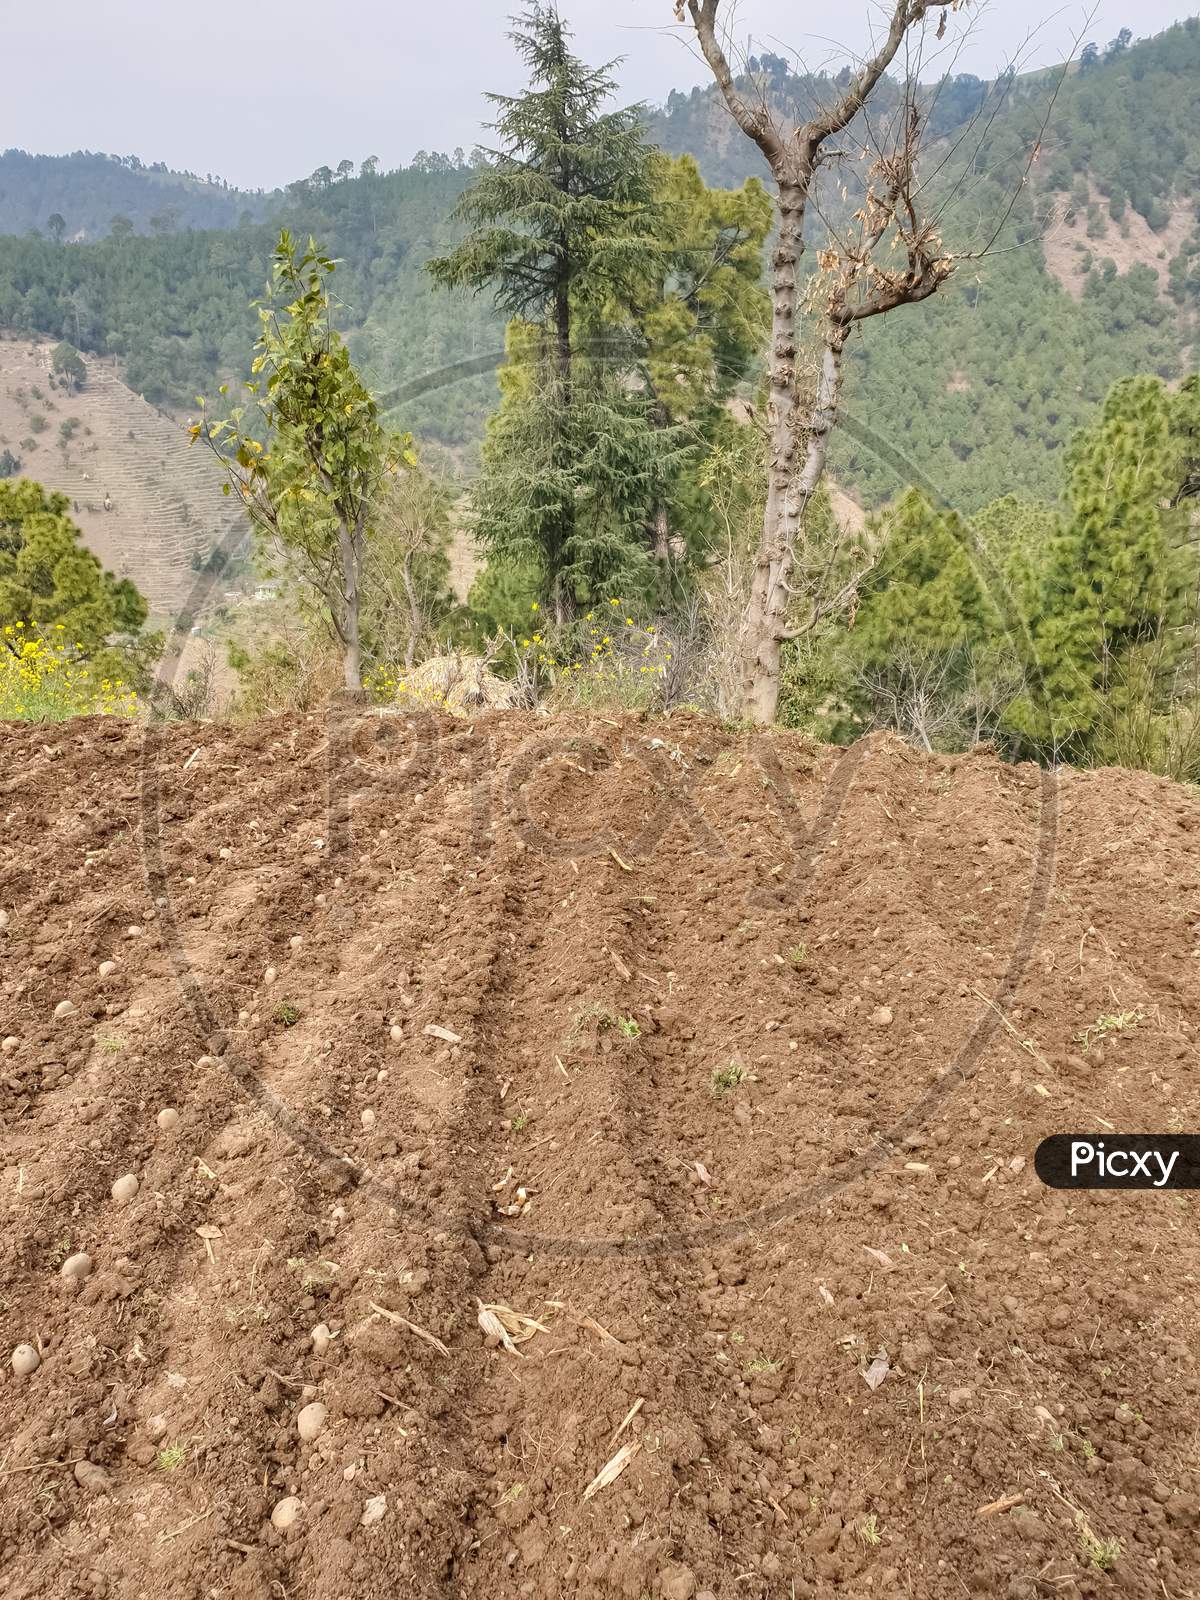 sowing potatoes in terracing farm with trees and beautiful green mountains in background in hilly area of Himachal pradesh, India